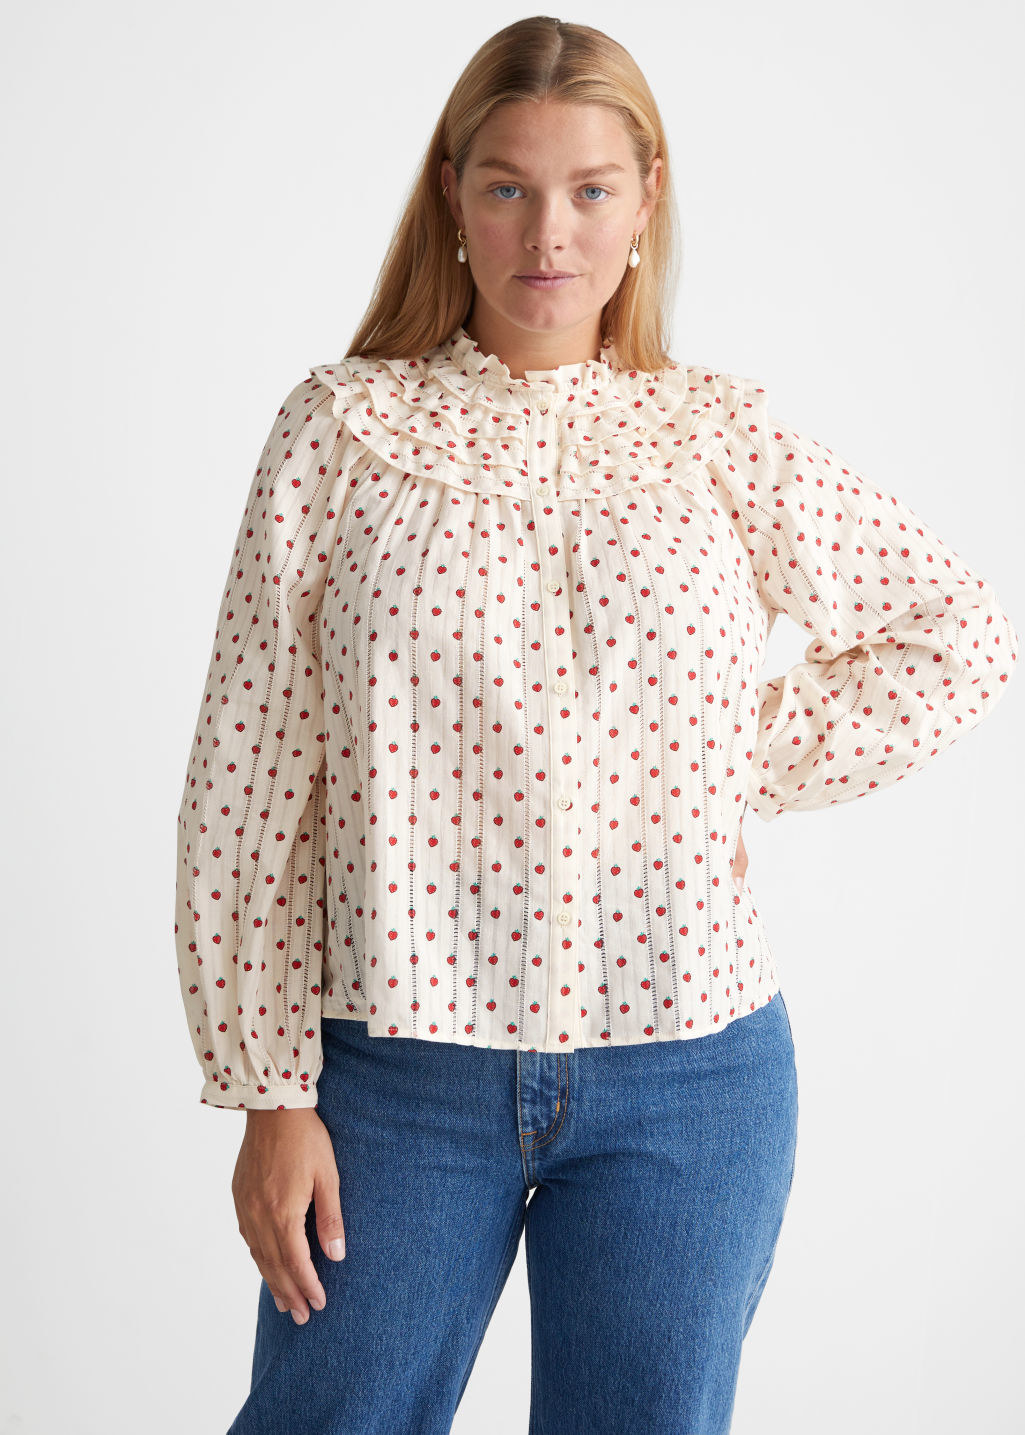 model in button down white blouse with red strawberry print